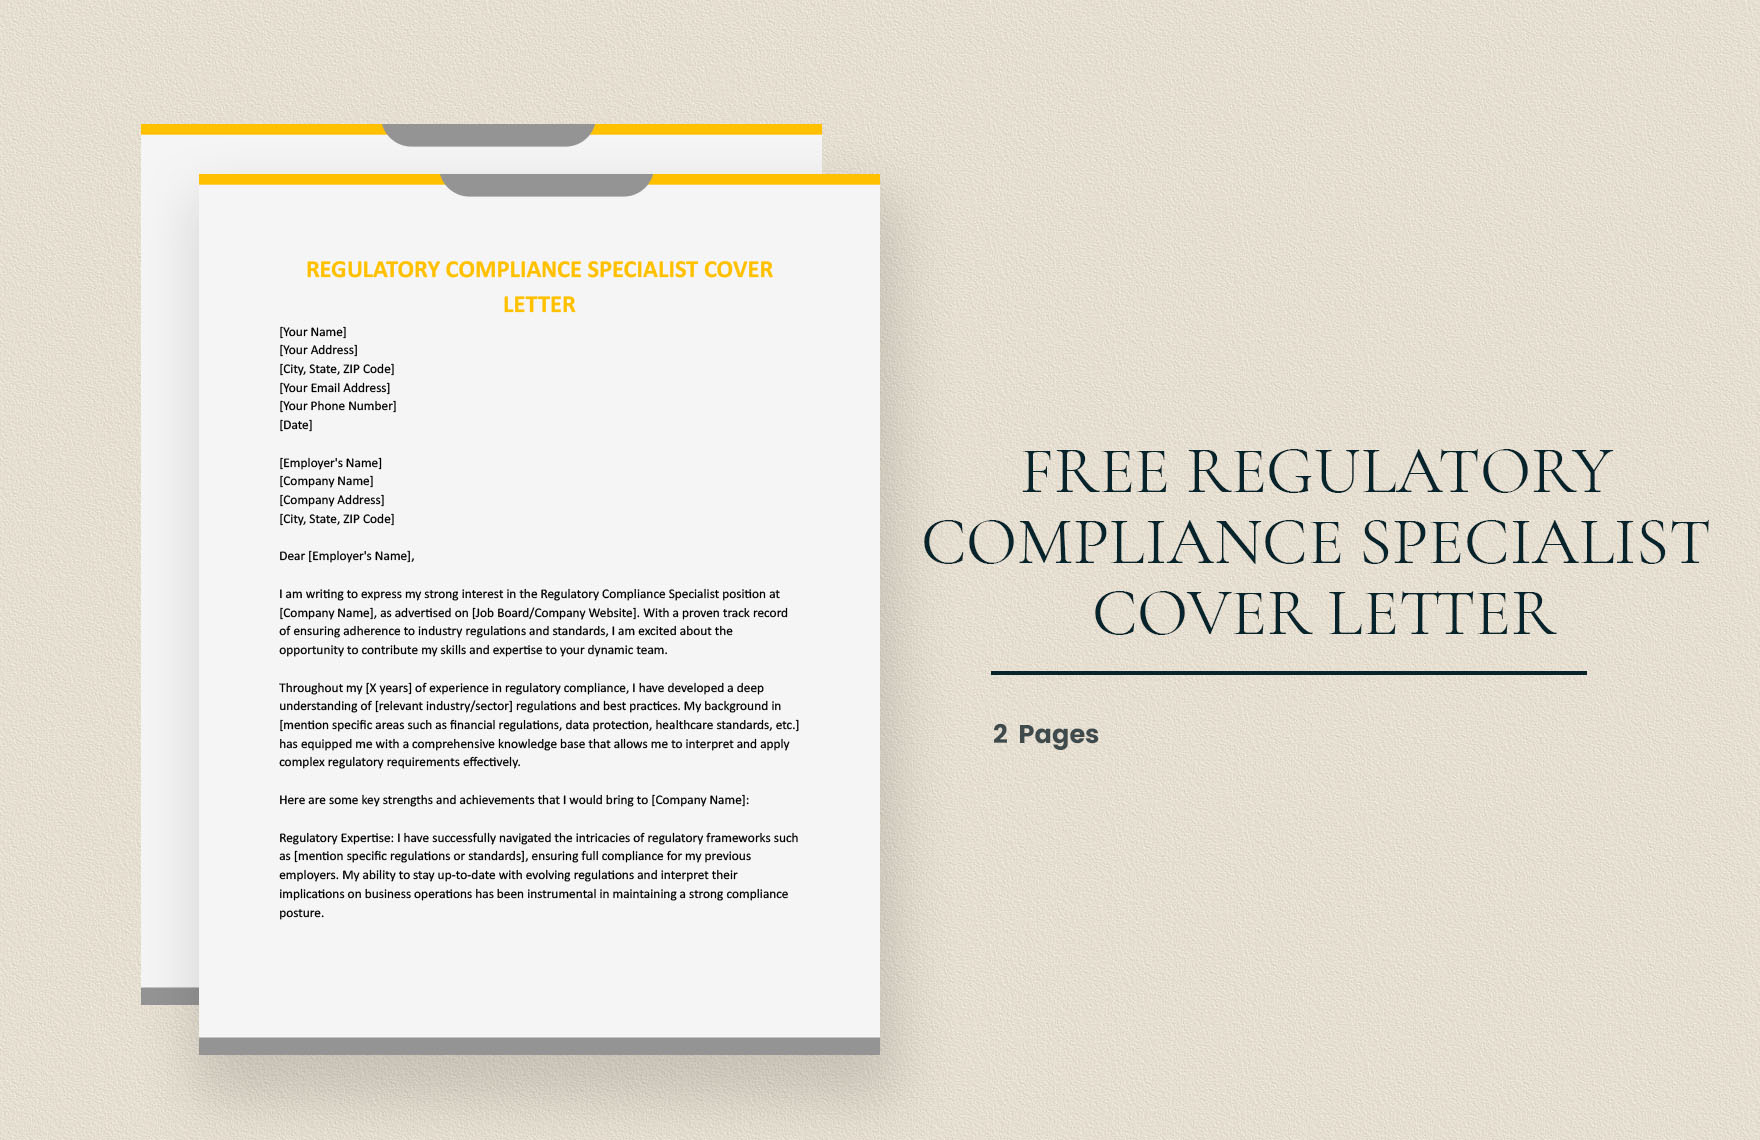 Regulatory Compliance Specialist Cover Letter